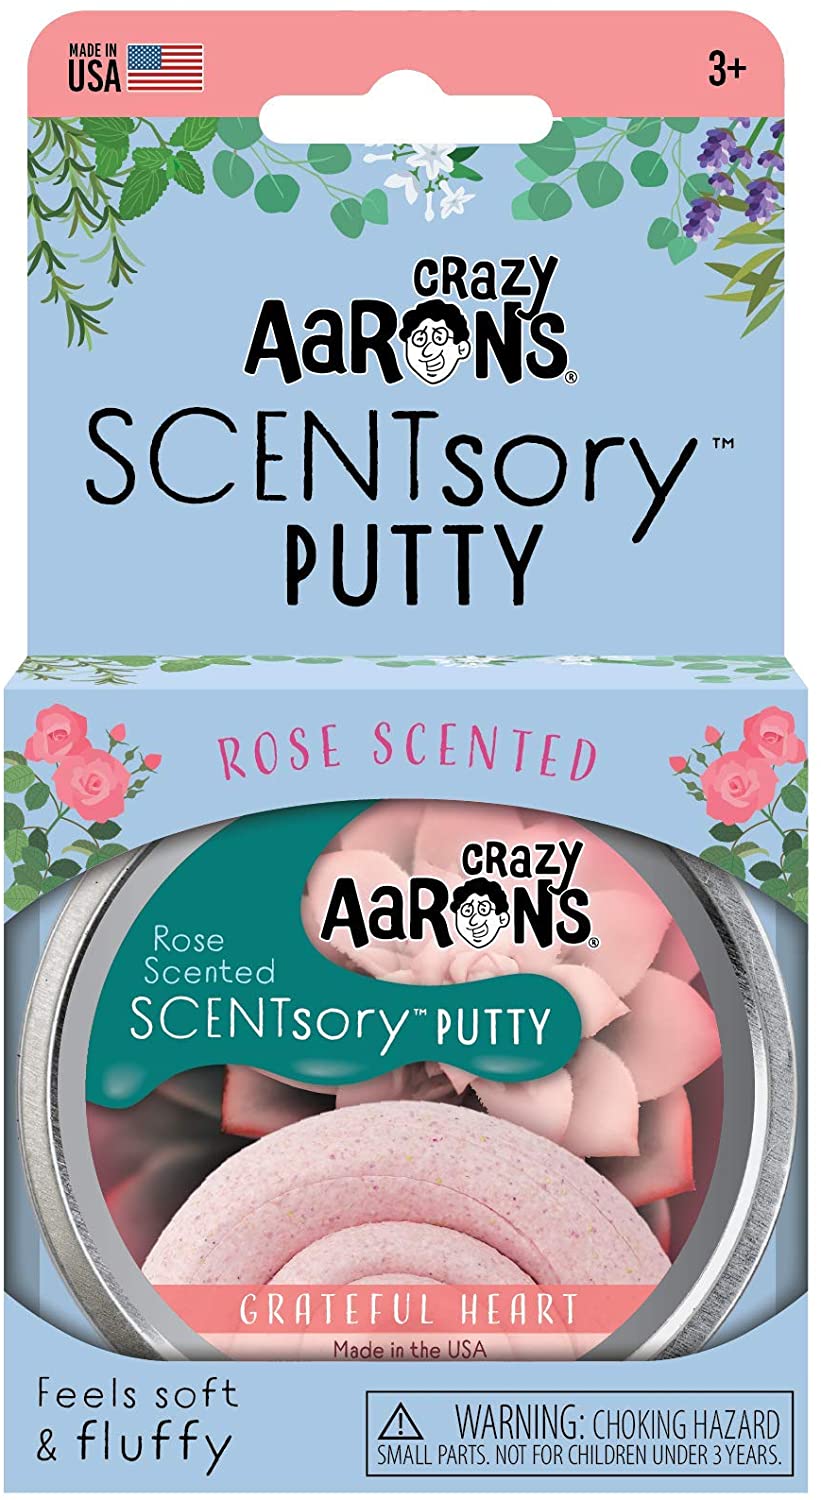 Crazy Aaron's 2.75" Rose Scented Grateful Heart Scentsory Putty Tin (SCN-GH055)